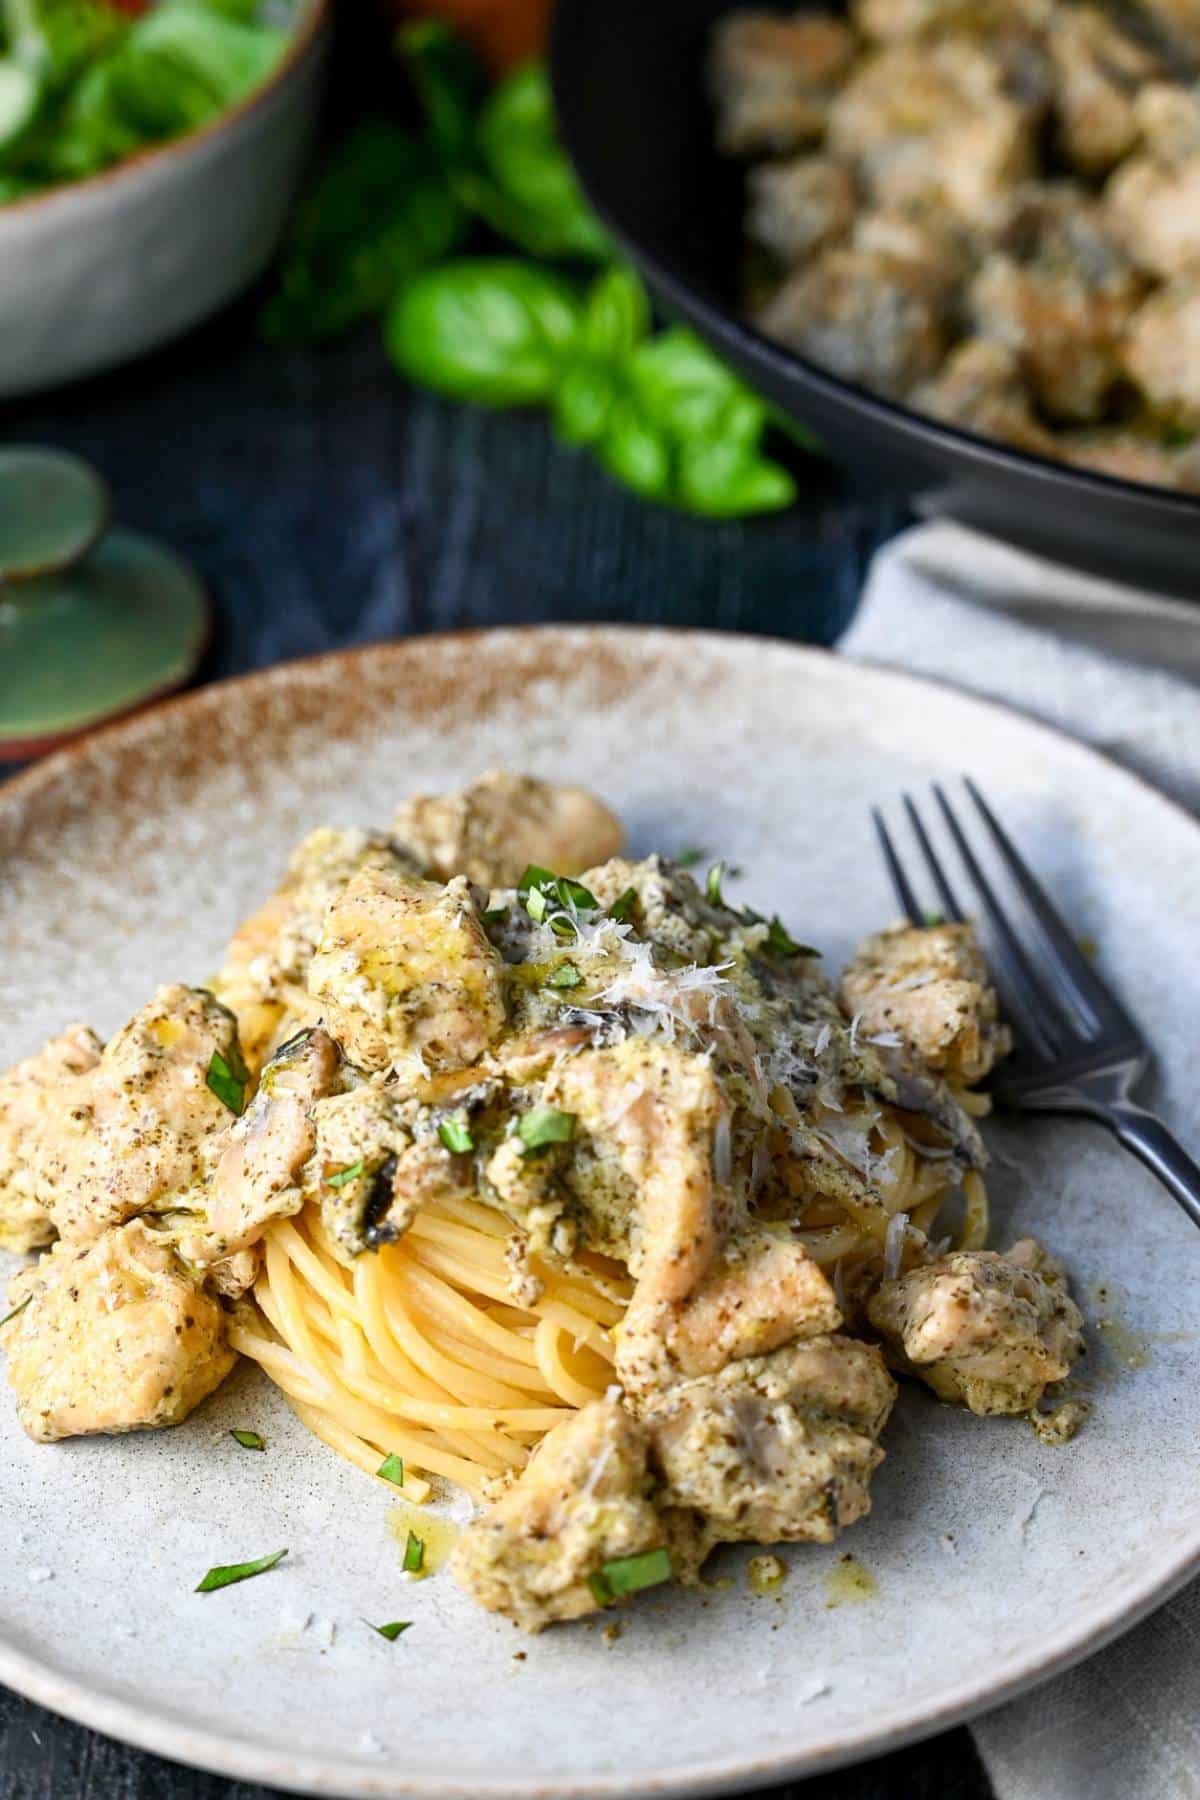 bite size chicken cooked in a pesto sauce on top of a bed of spaghetti noodles with fresh basil on top